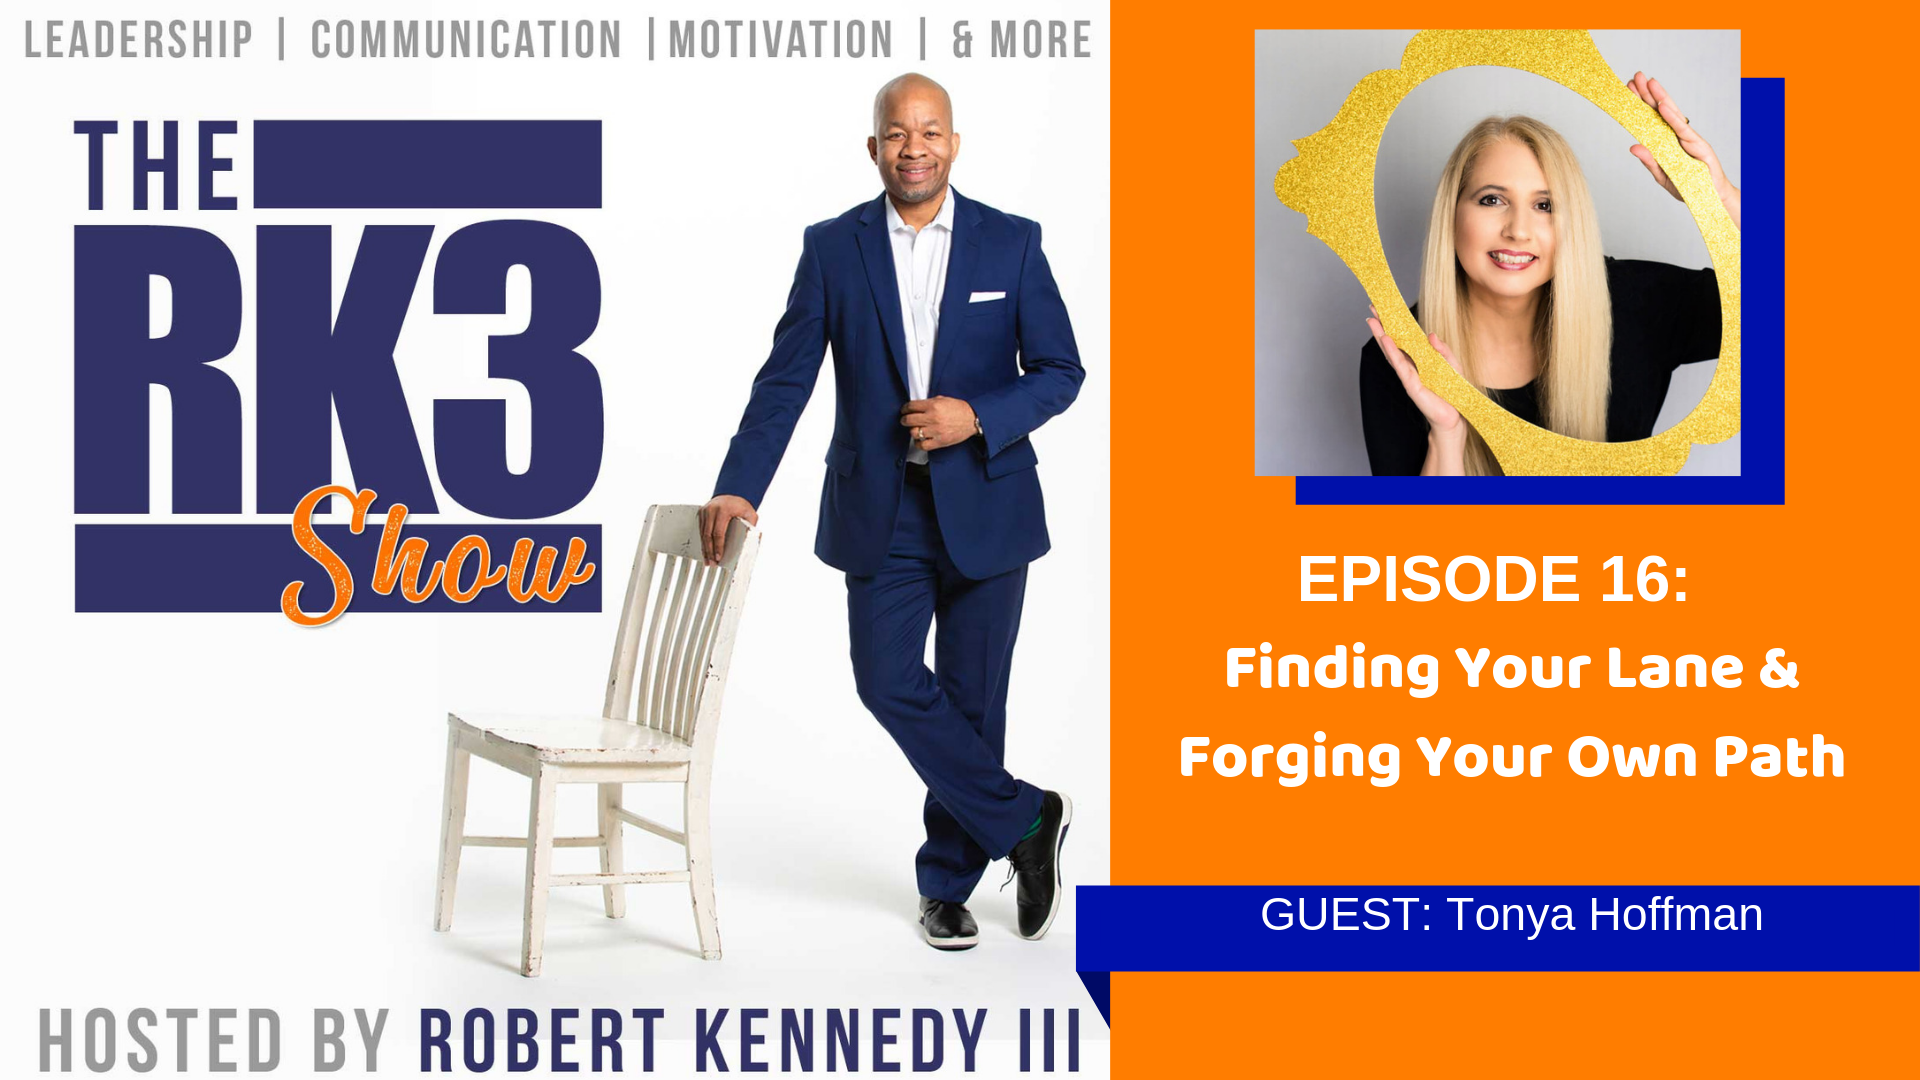 The RK3 Show: Finding Your Lane & Forging Your Own Path